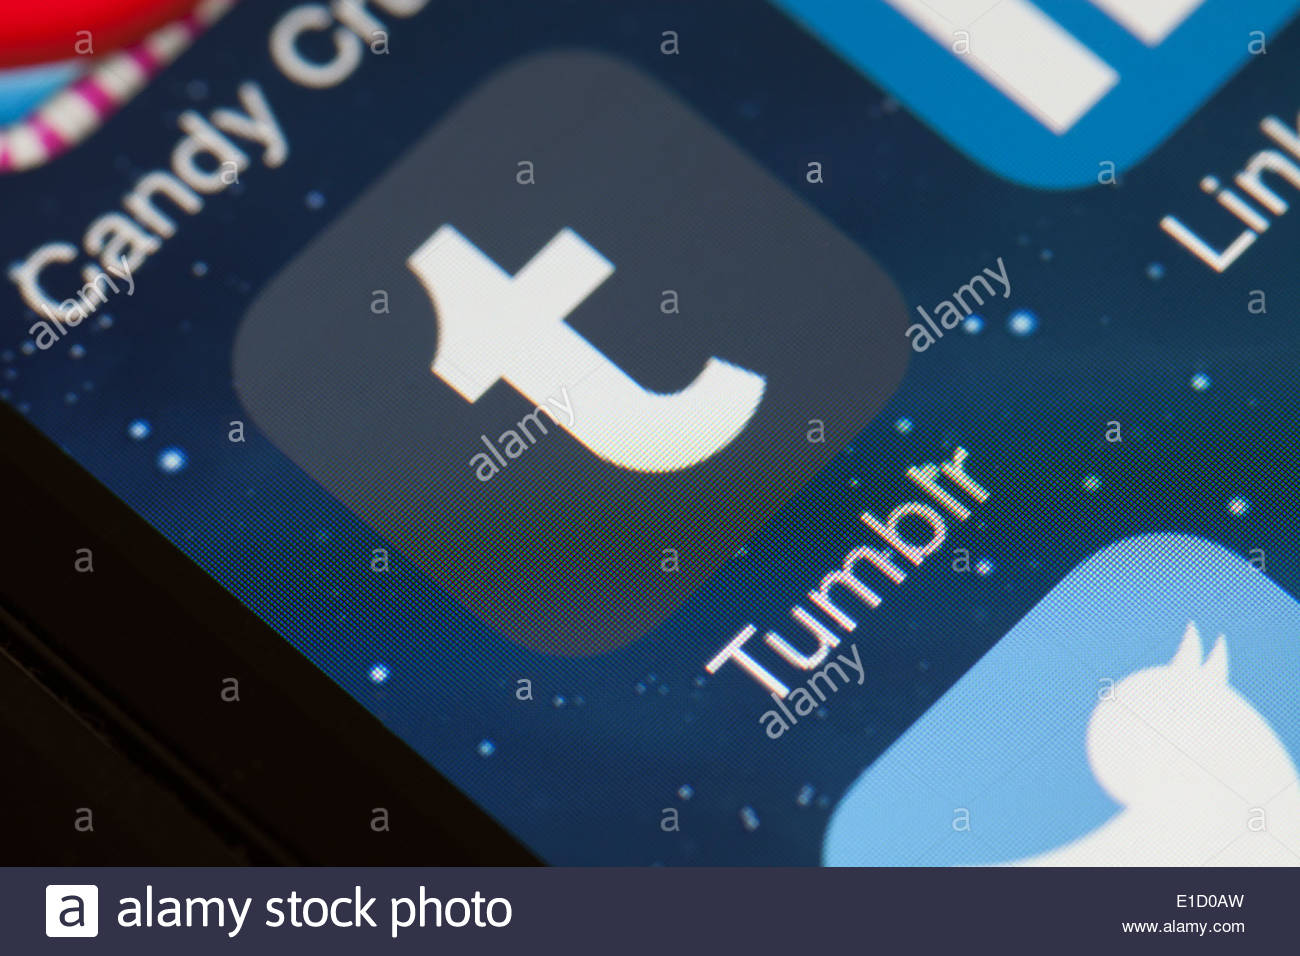 At a Glance: New App Icon for Tumblr  Beautiful Pixels